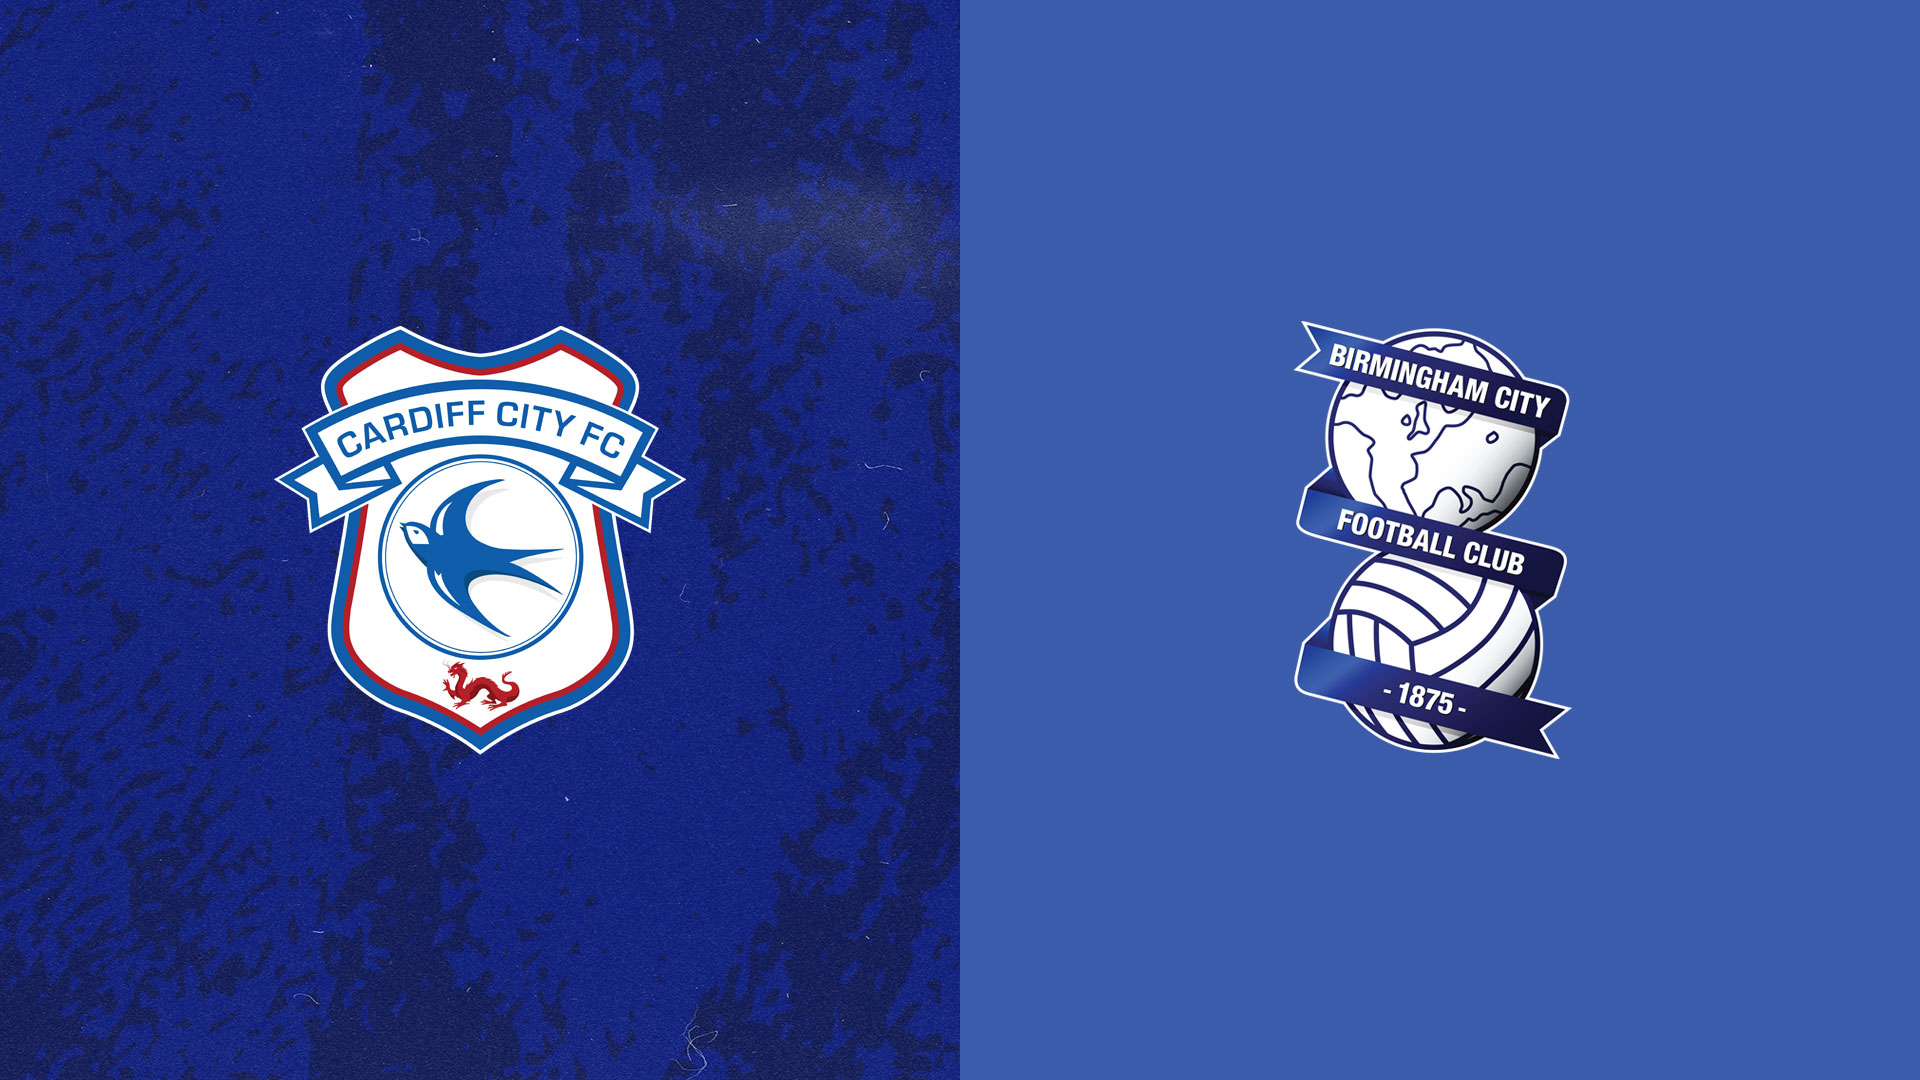 The Bluebirds vs. the Blues this Saturday...